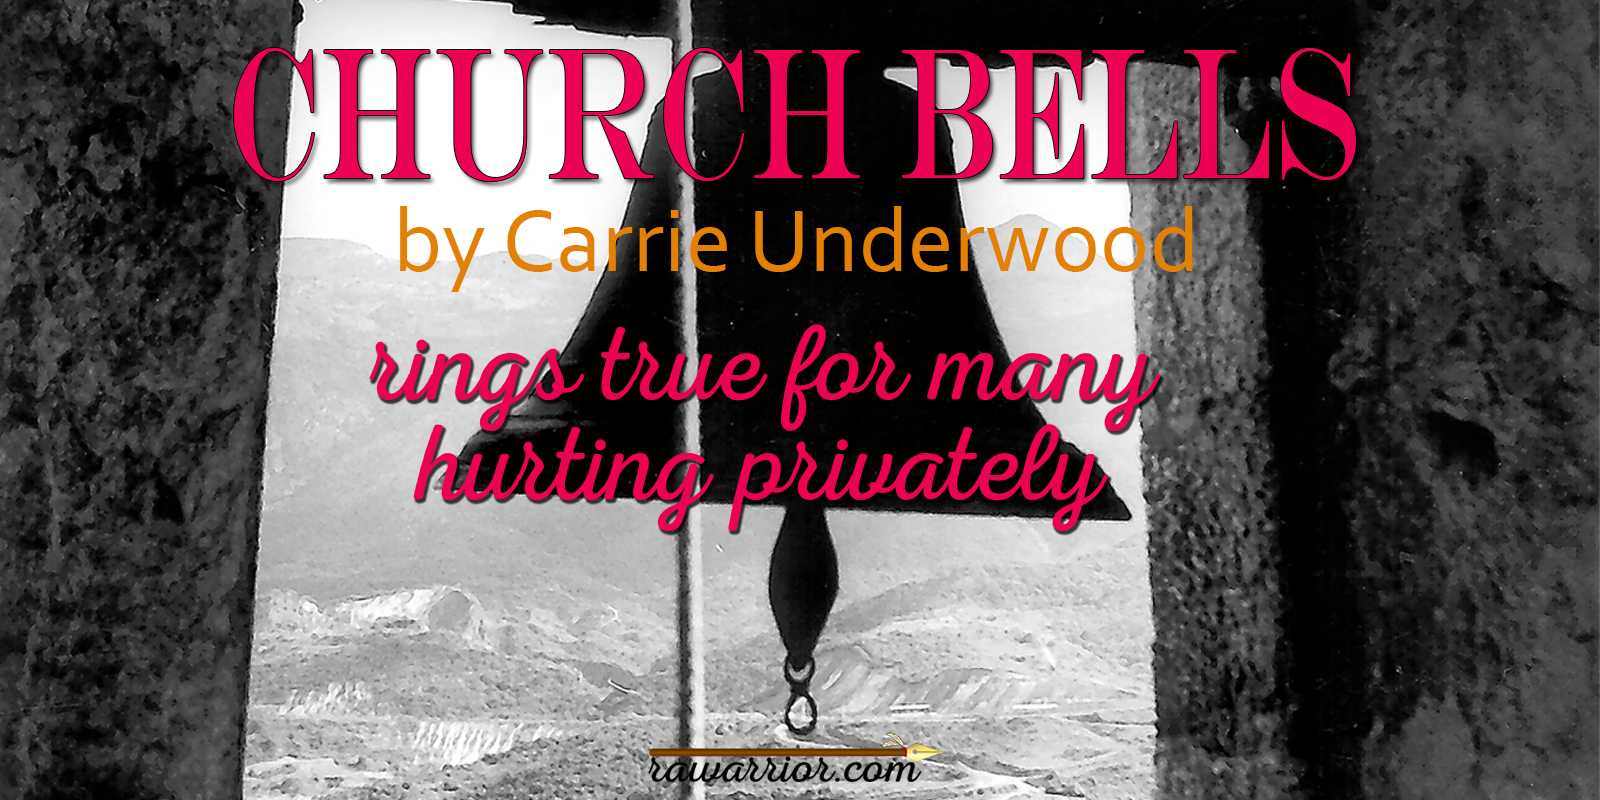 Church Bells by Carrie Underwood